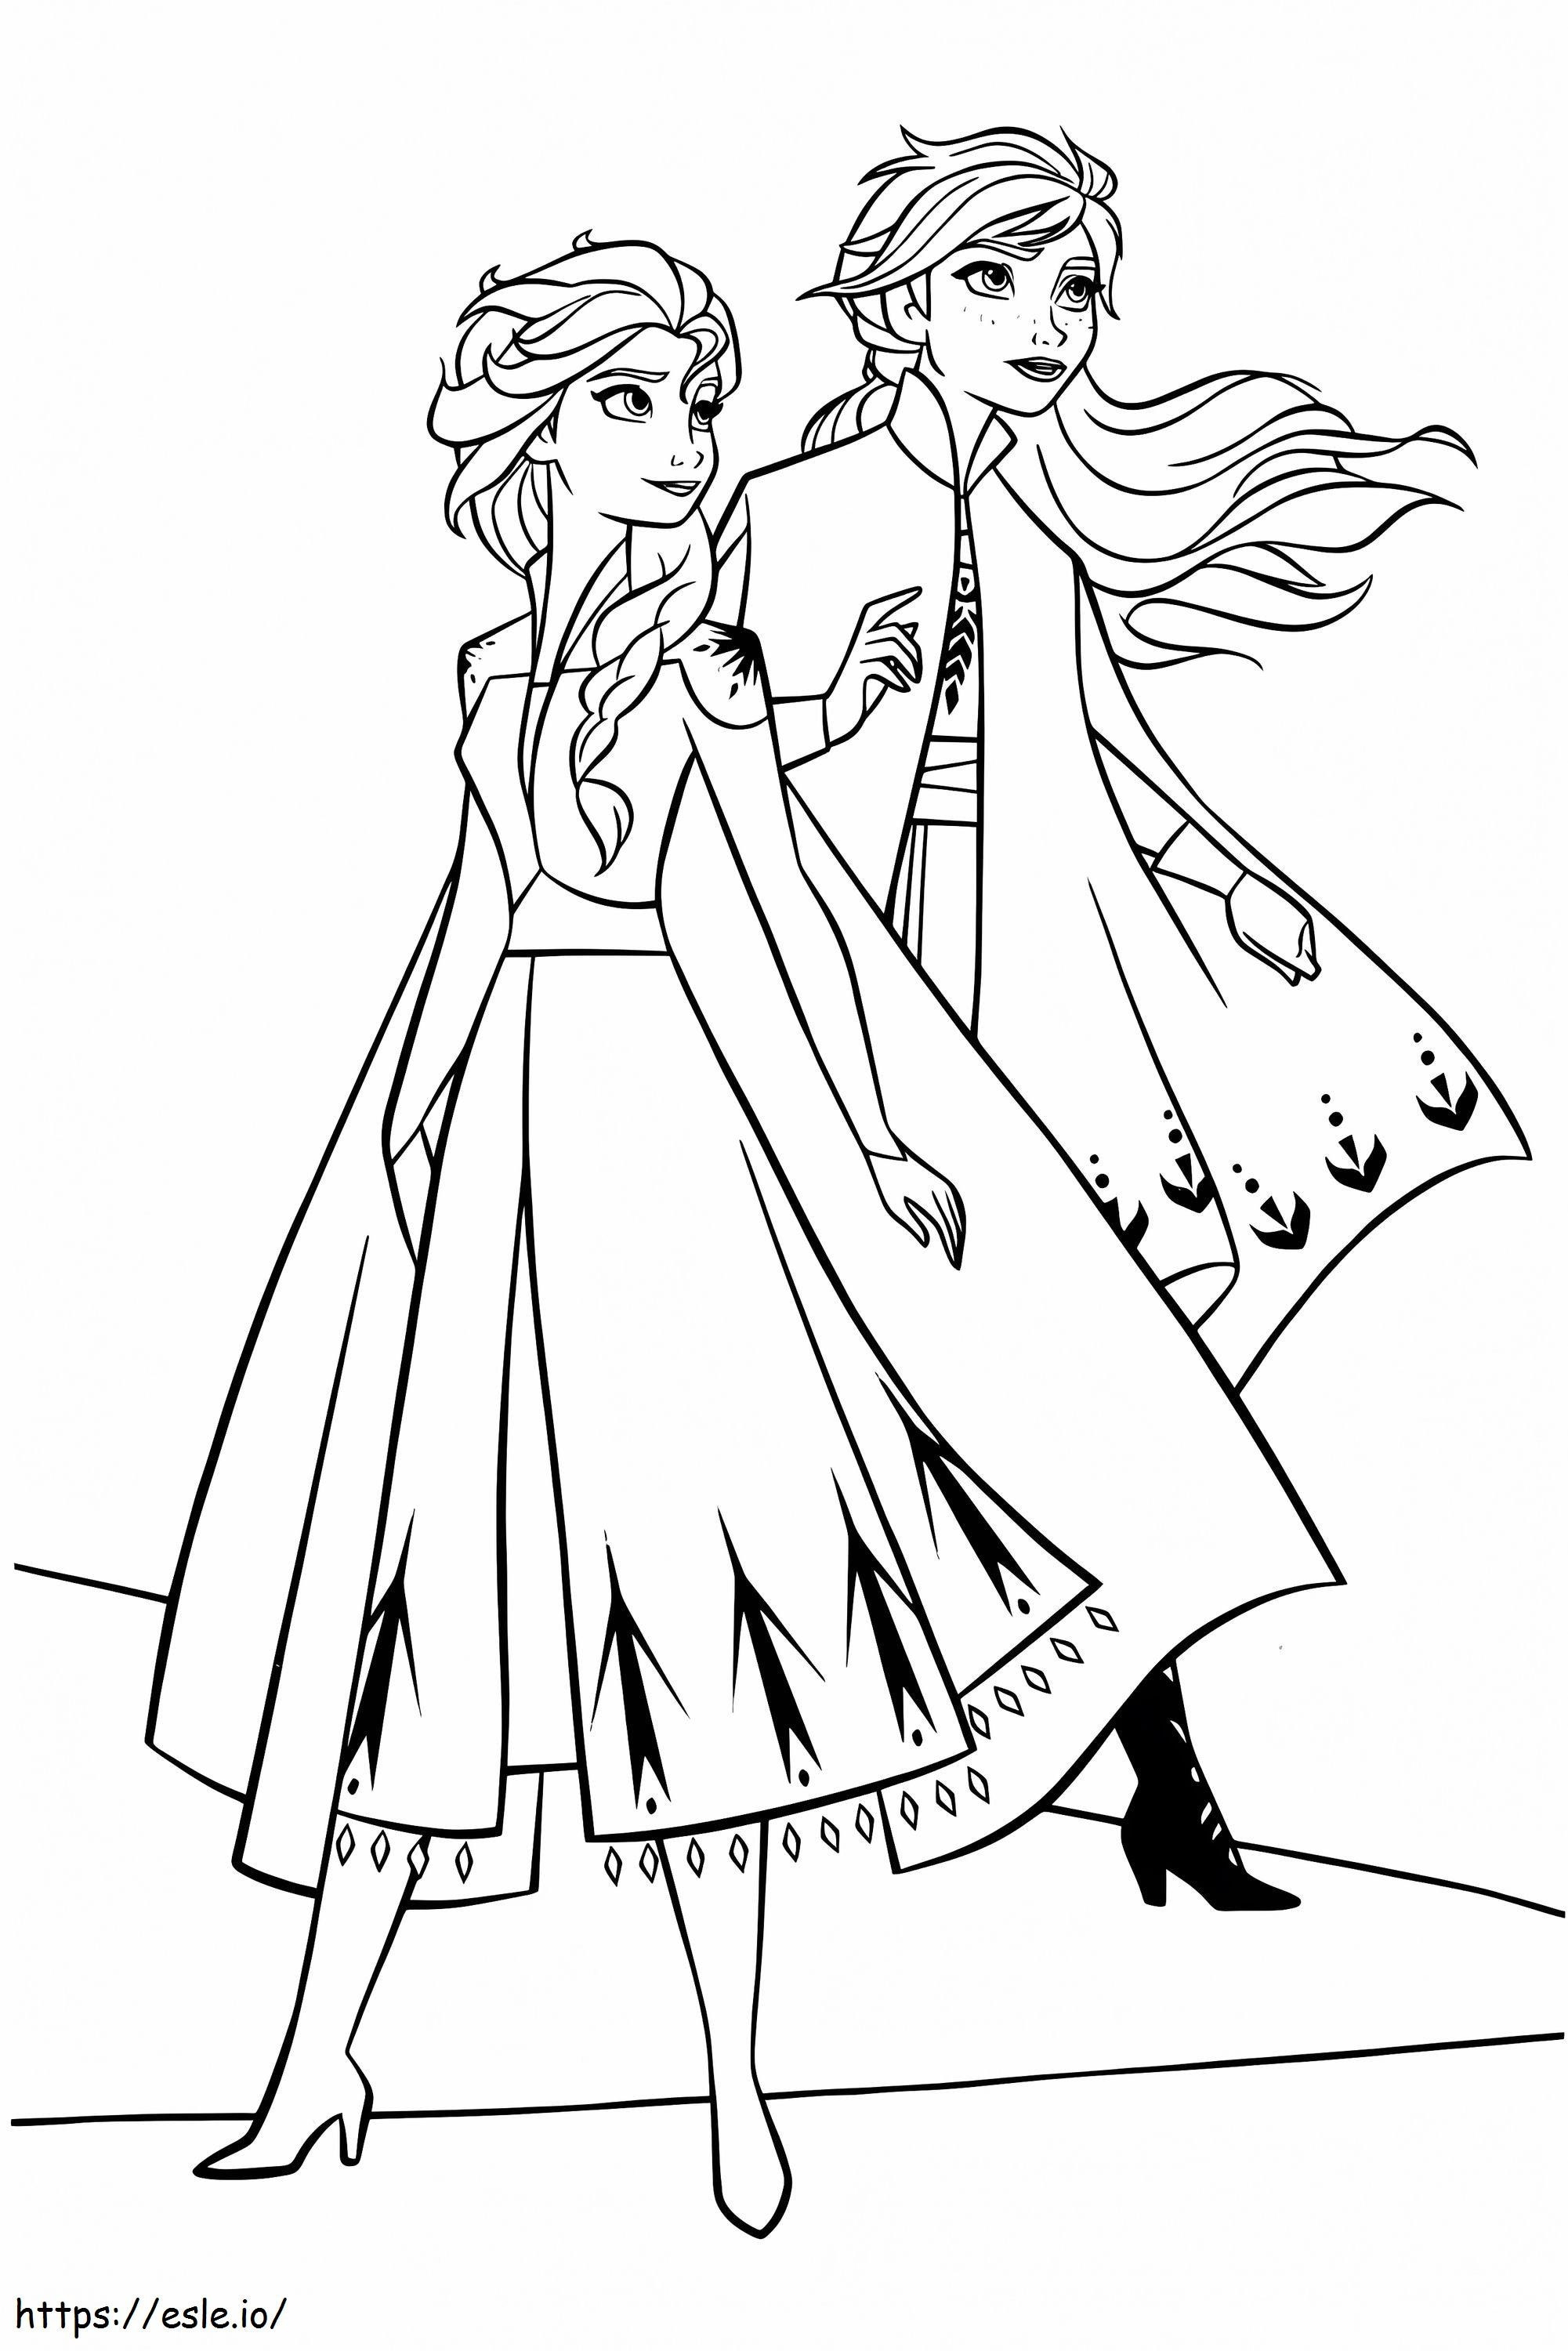 Frozen 2 Elsa And Anna 683X1024 coloring page